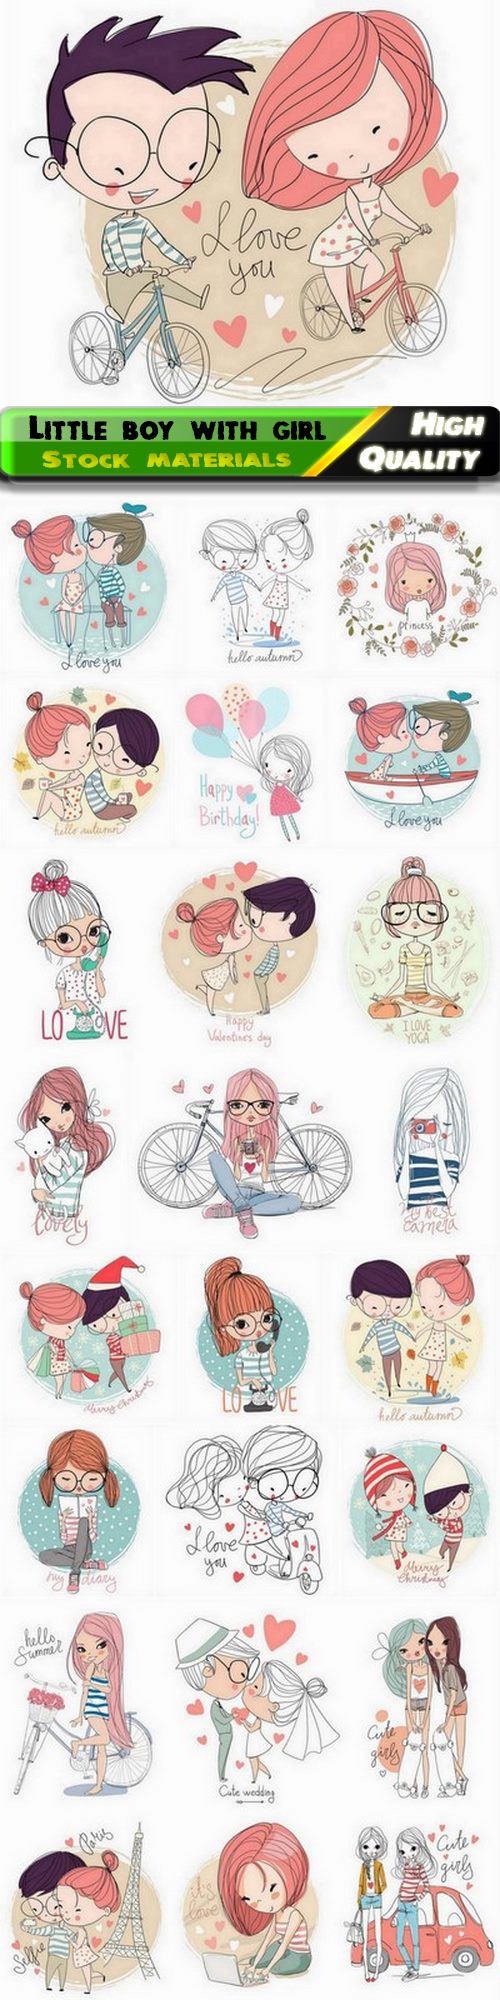 Sketches of cute little boy with girl and romantic couple - 25 Eps